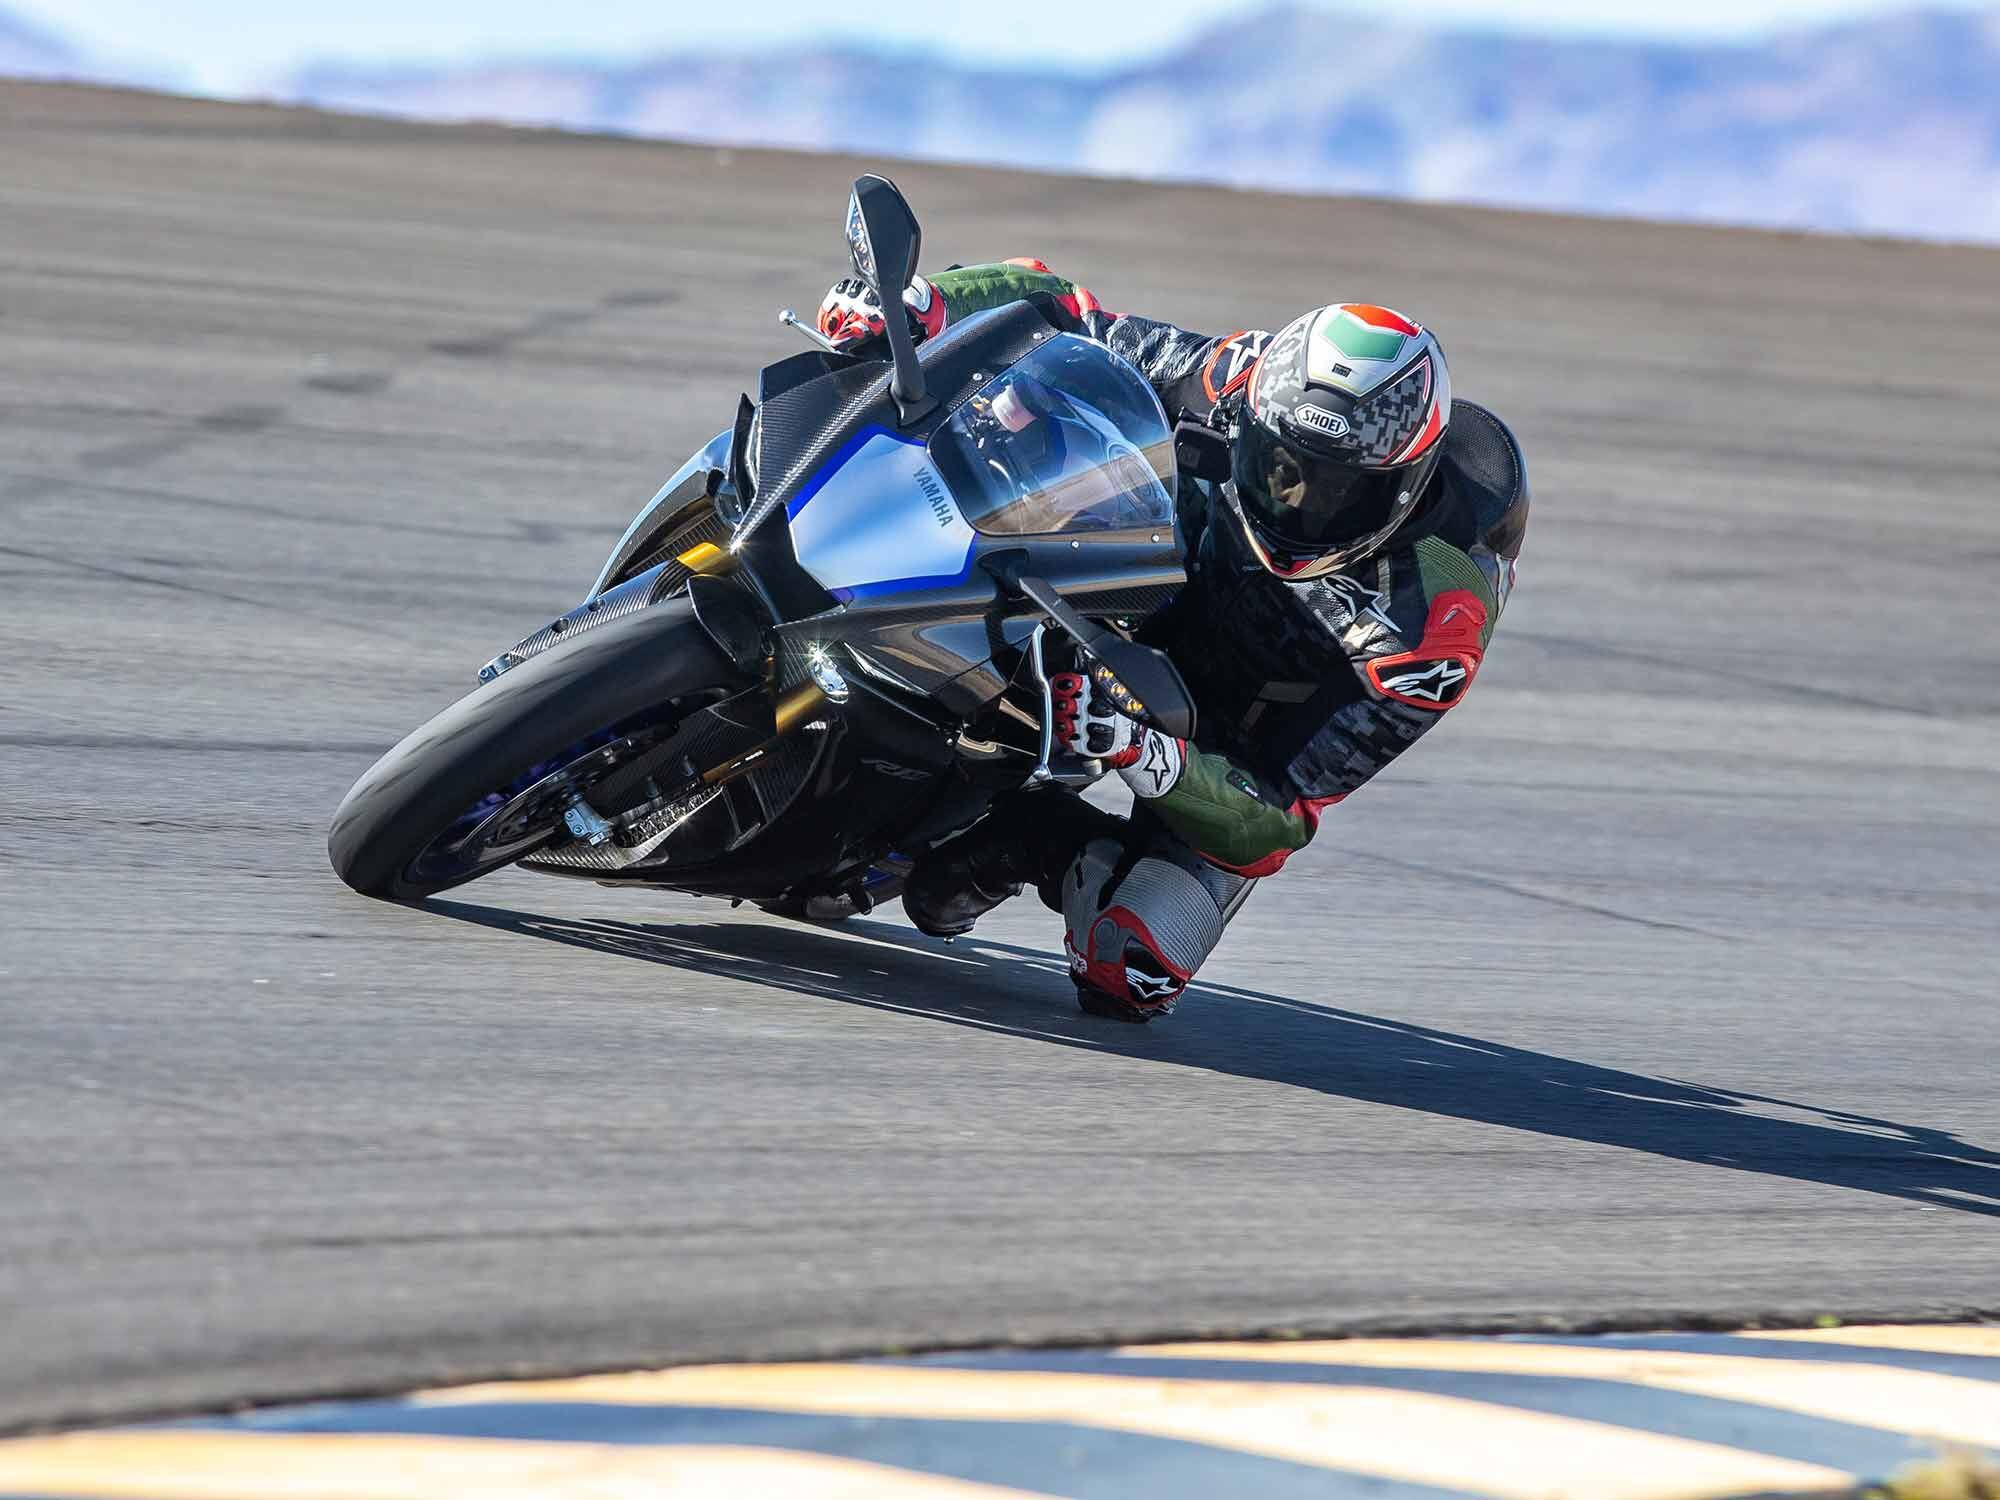 Yamaha’s YZF-R1M is a hoot to ride, especially at the racetrack where its advanced rider aids and 165 hp I4 engine make for the ultimate play date.